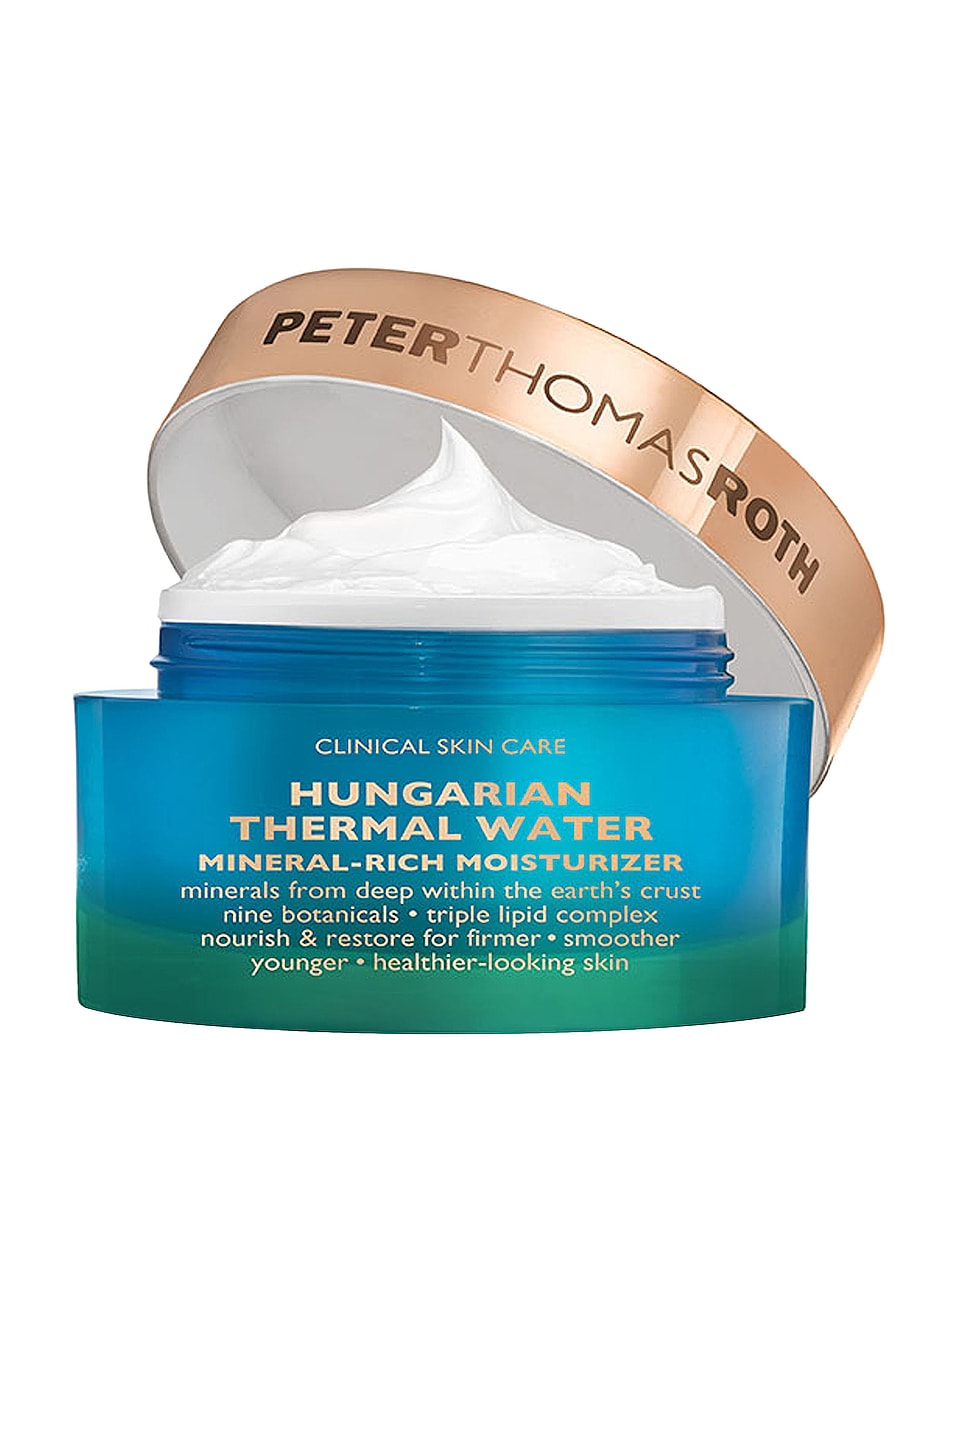 PETER THOMAS ROTH HUNGARIAN THERMAL WATER MINERAL RICH MOISTURIZER,PTHO-WU21